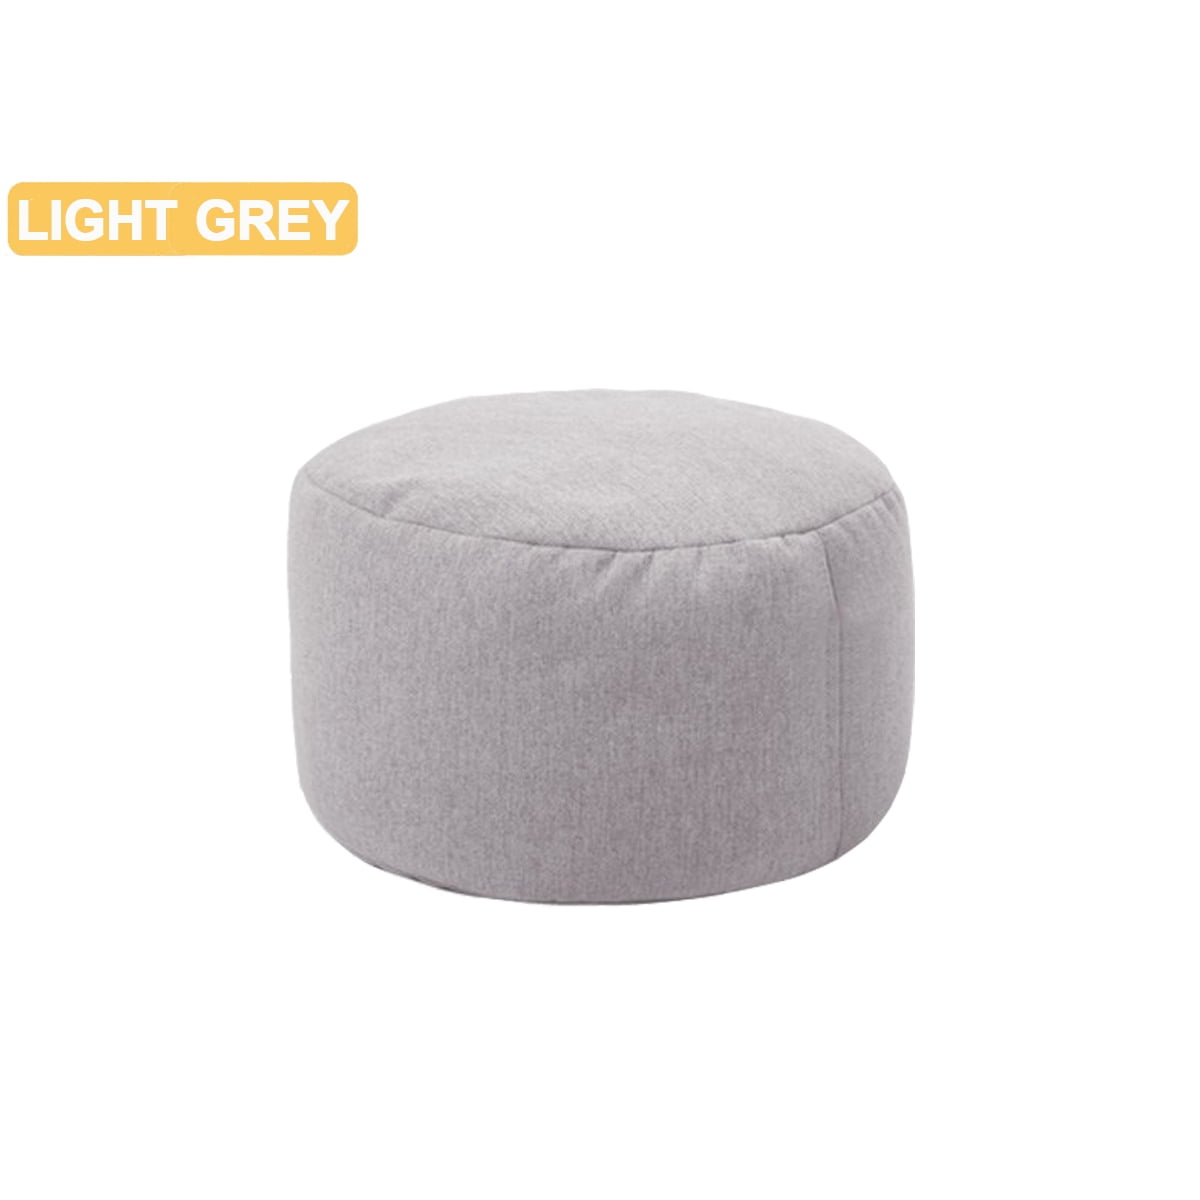 2019 Fabric Ottoman Footstool Foot Stool Rest Pouffe Seat Bean Bag Cover    @ 